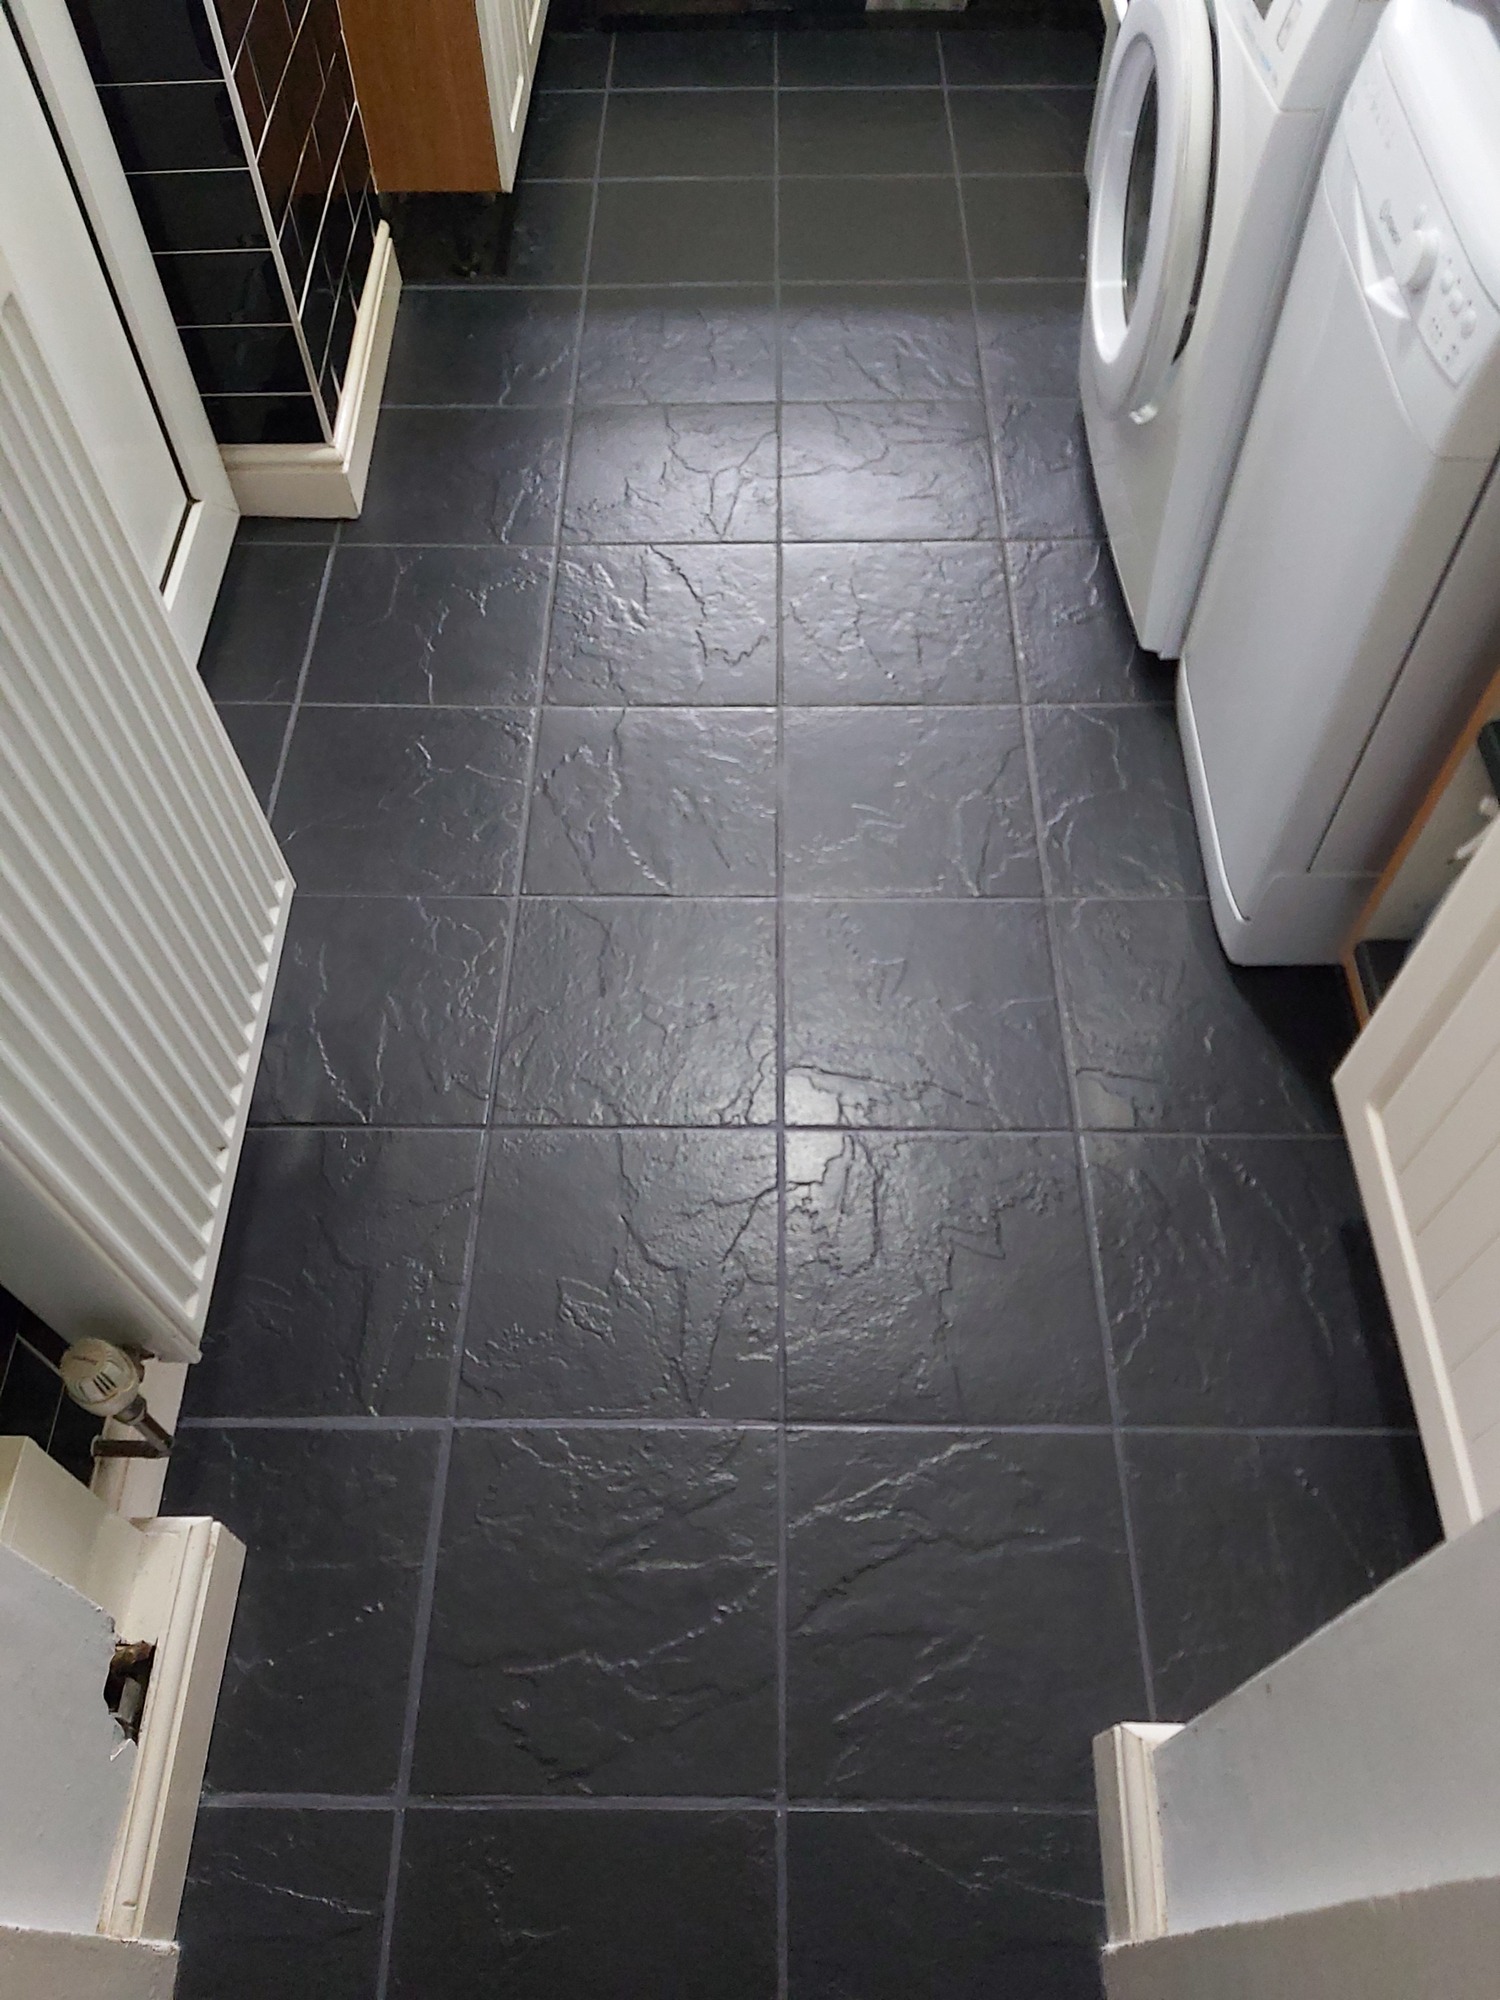 Dark Grey Grout Paint, Light Gray Tile With Dark Grout